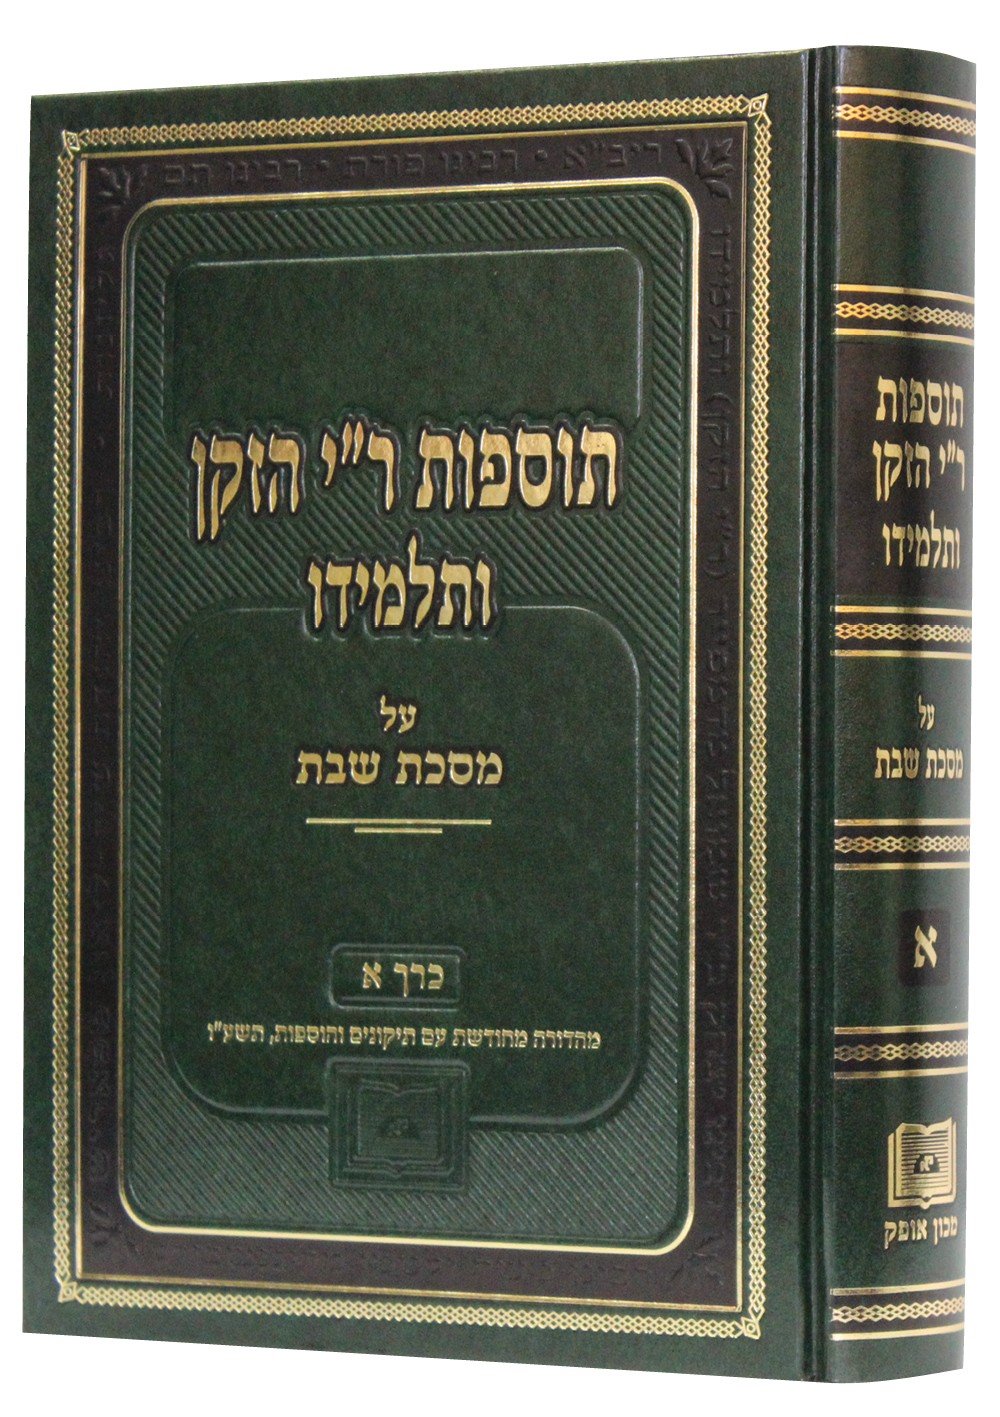 Tosafot R"I the Elder and Early Tosafists - Volume I On Tractate Shabbat Chapters 1-6